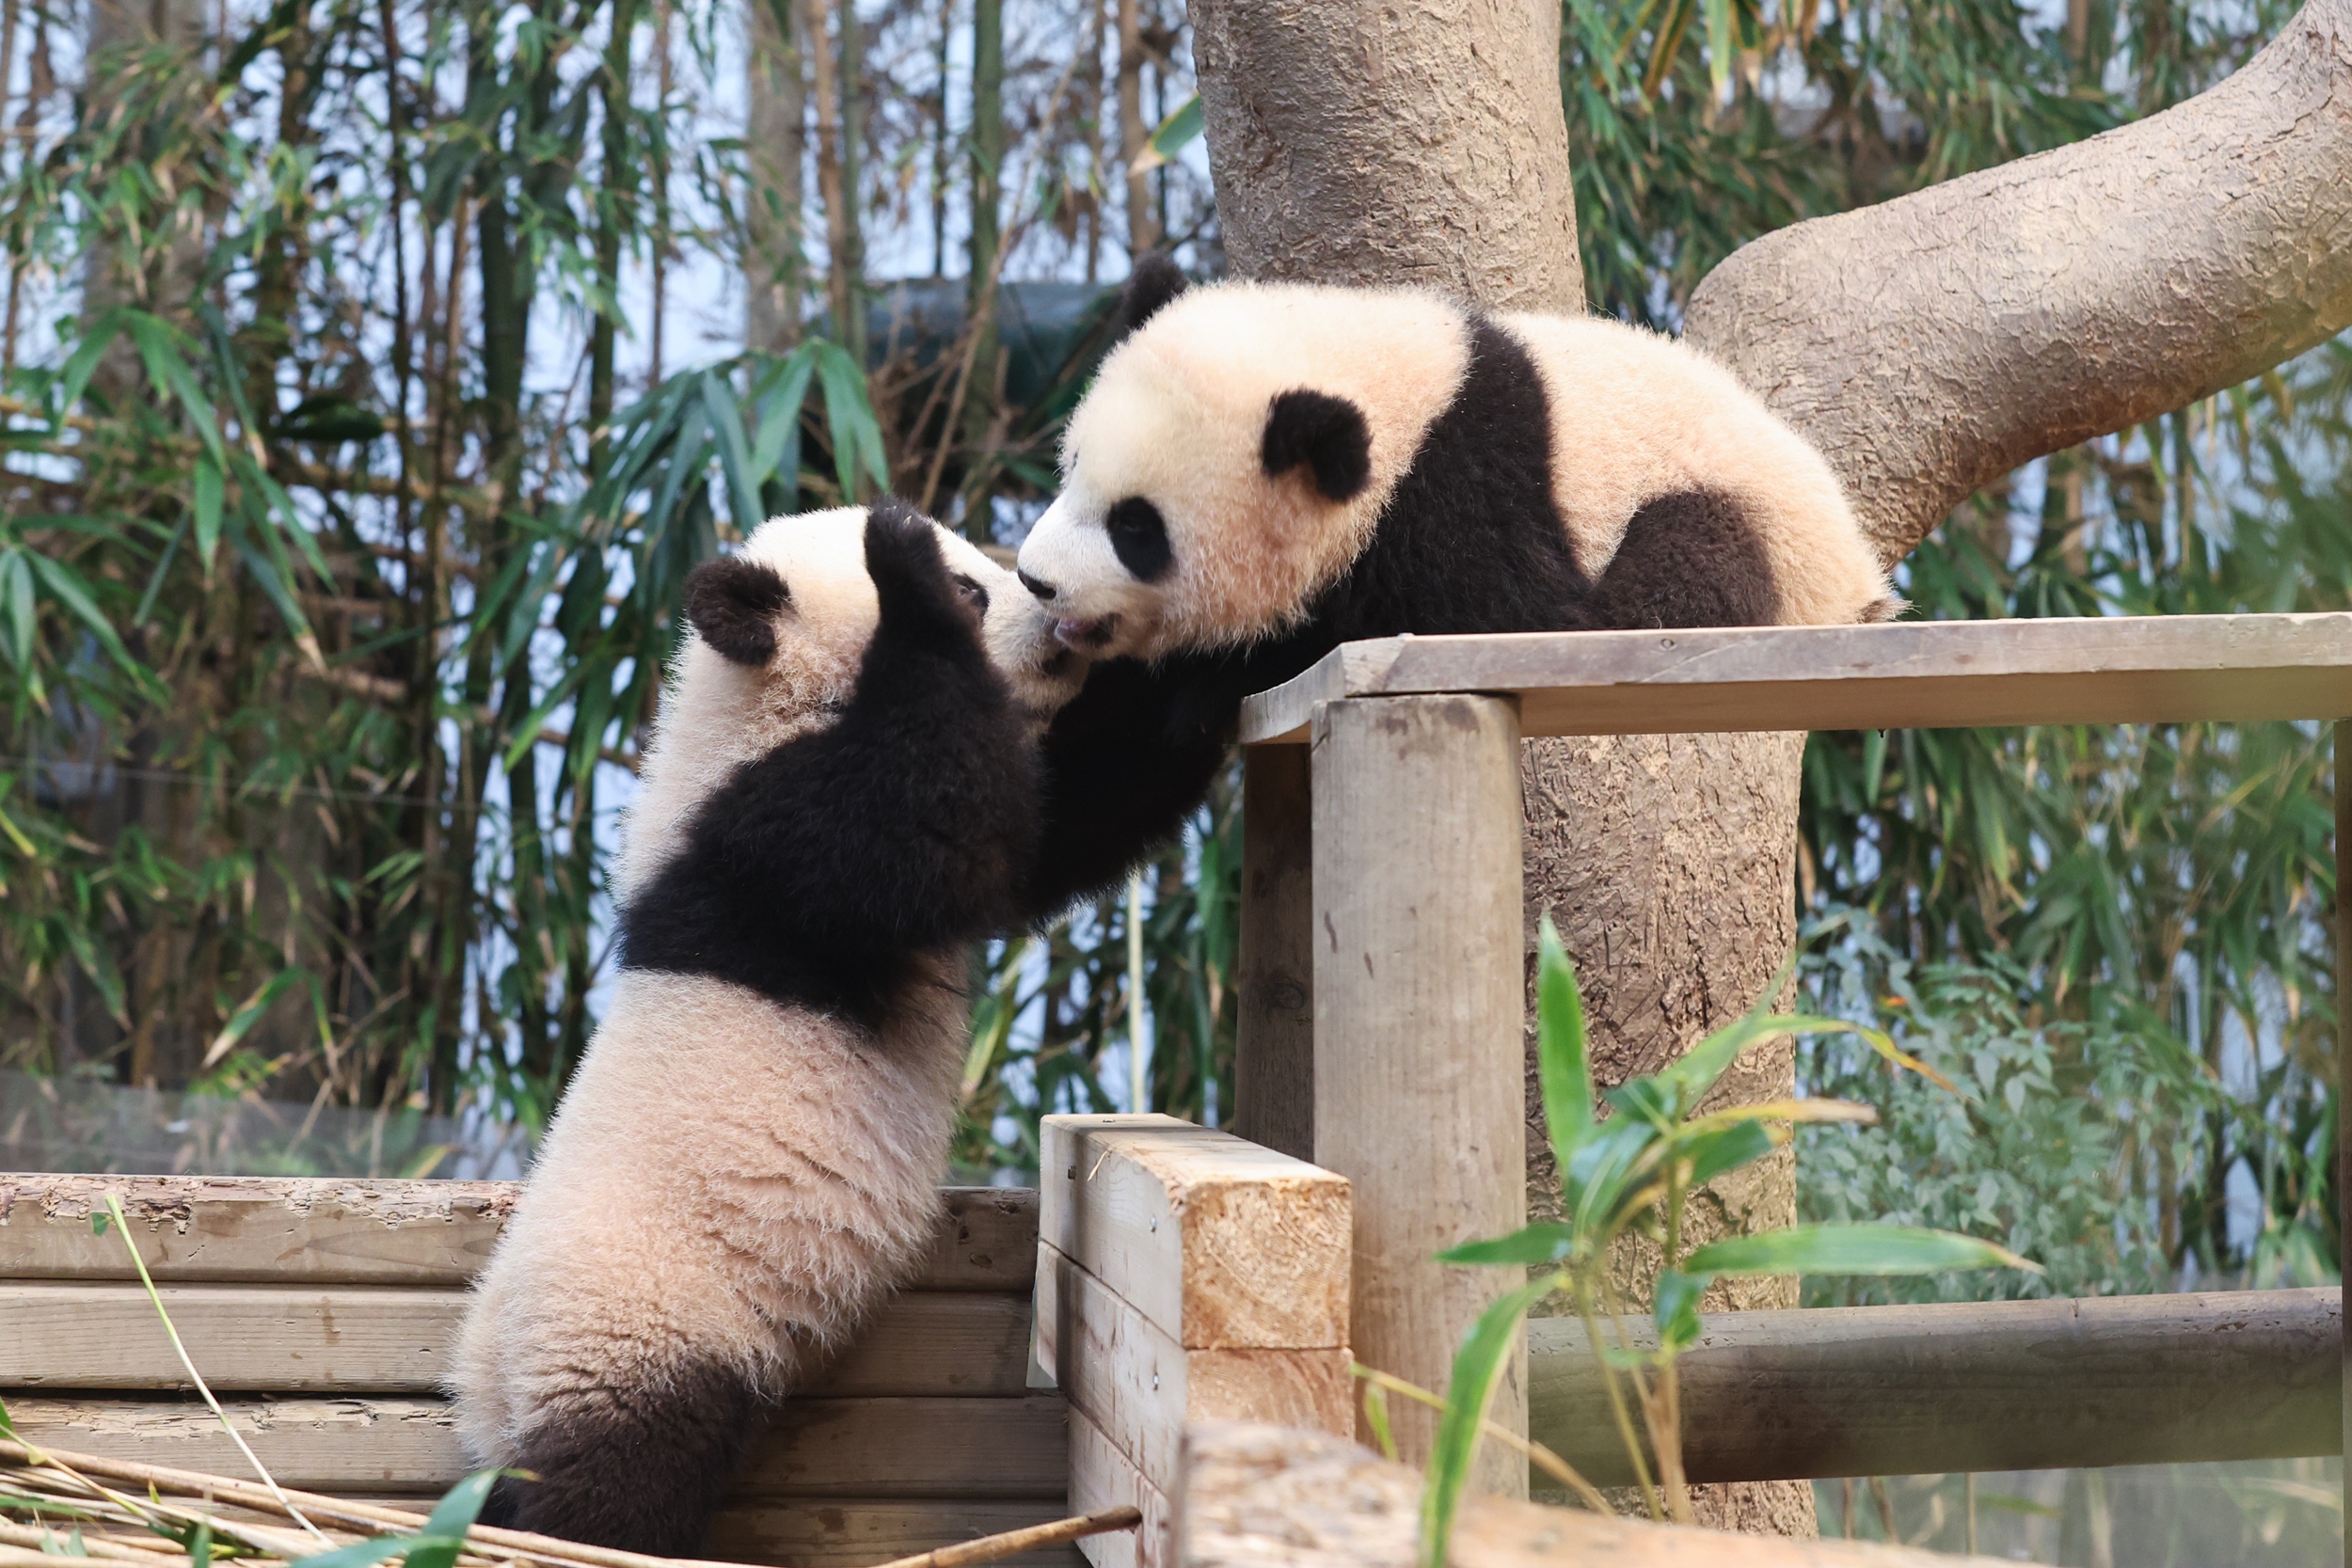 The panda twins seem to be chatting with each other.